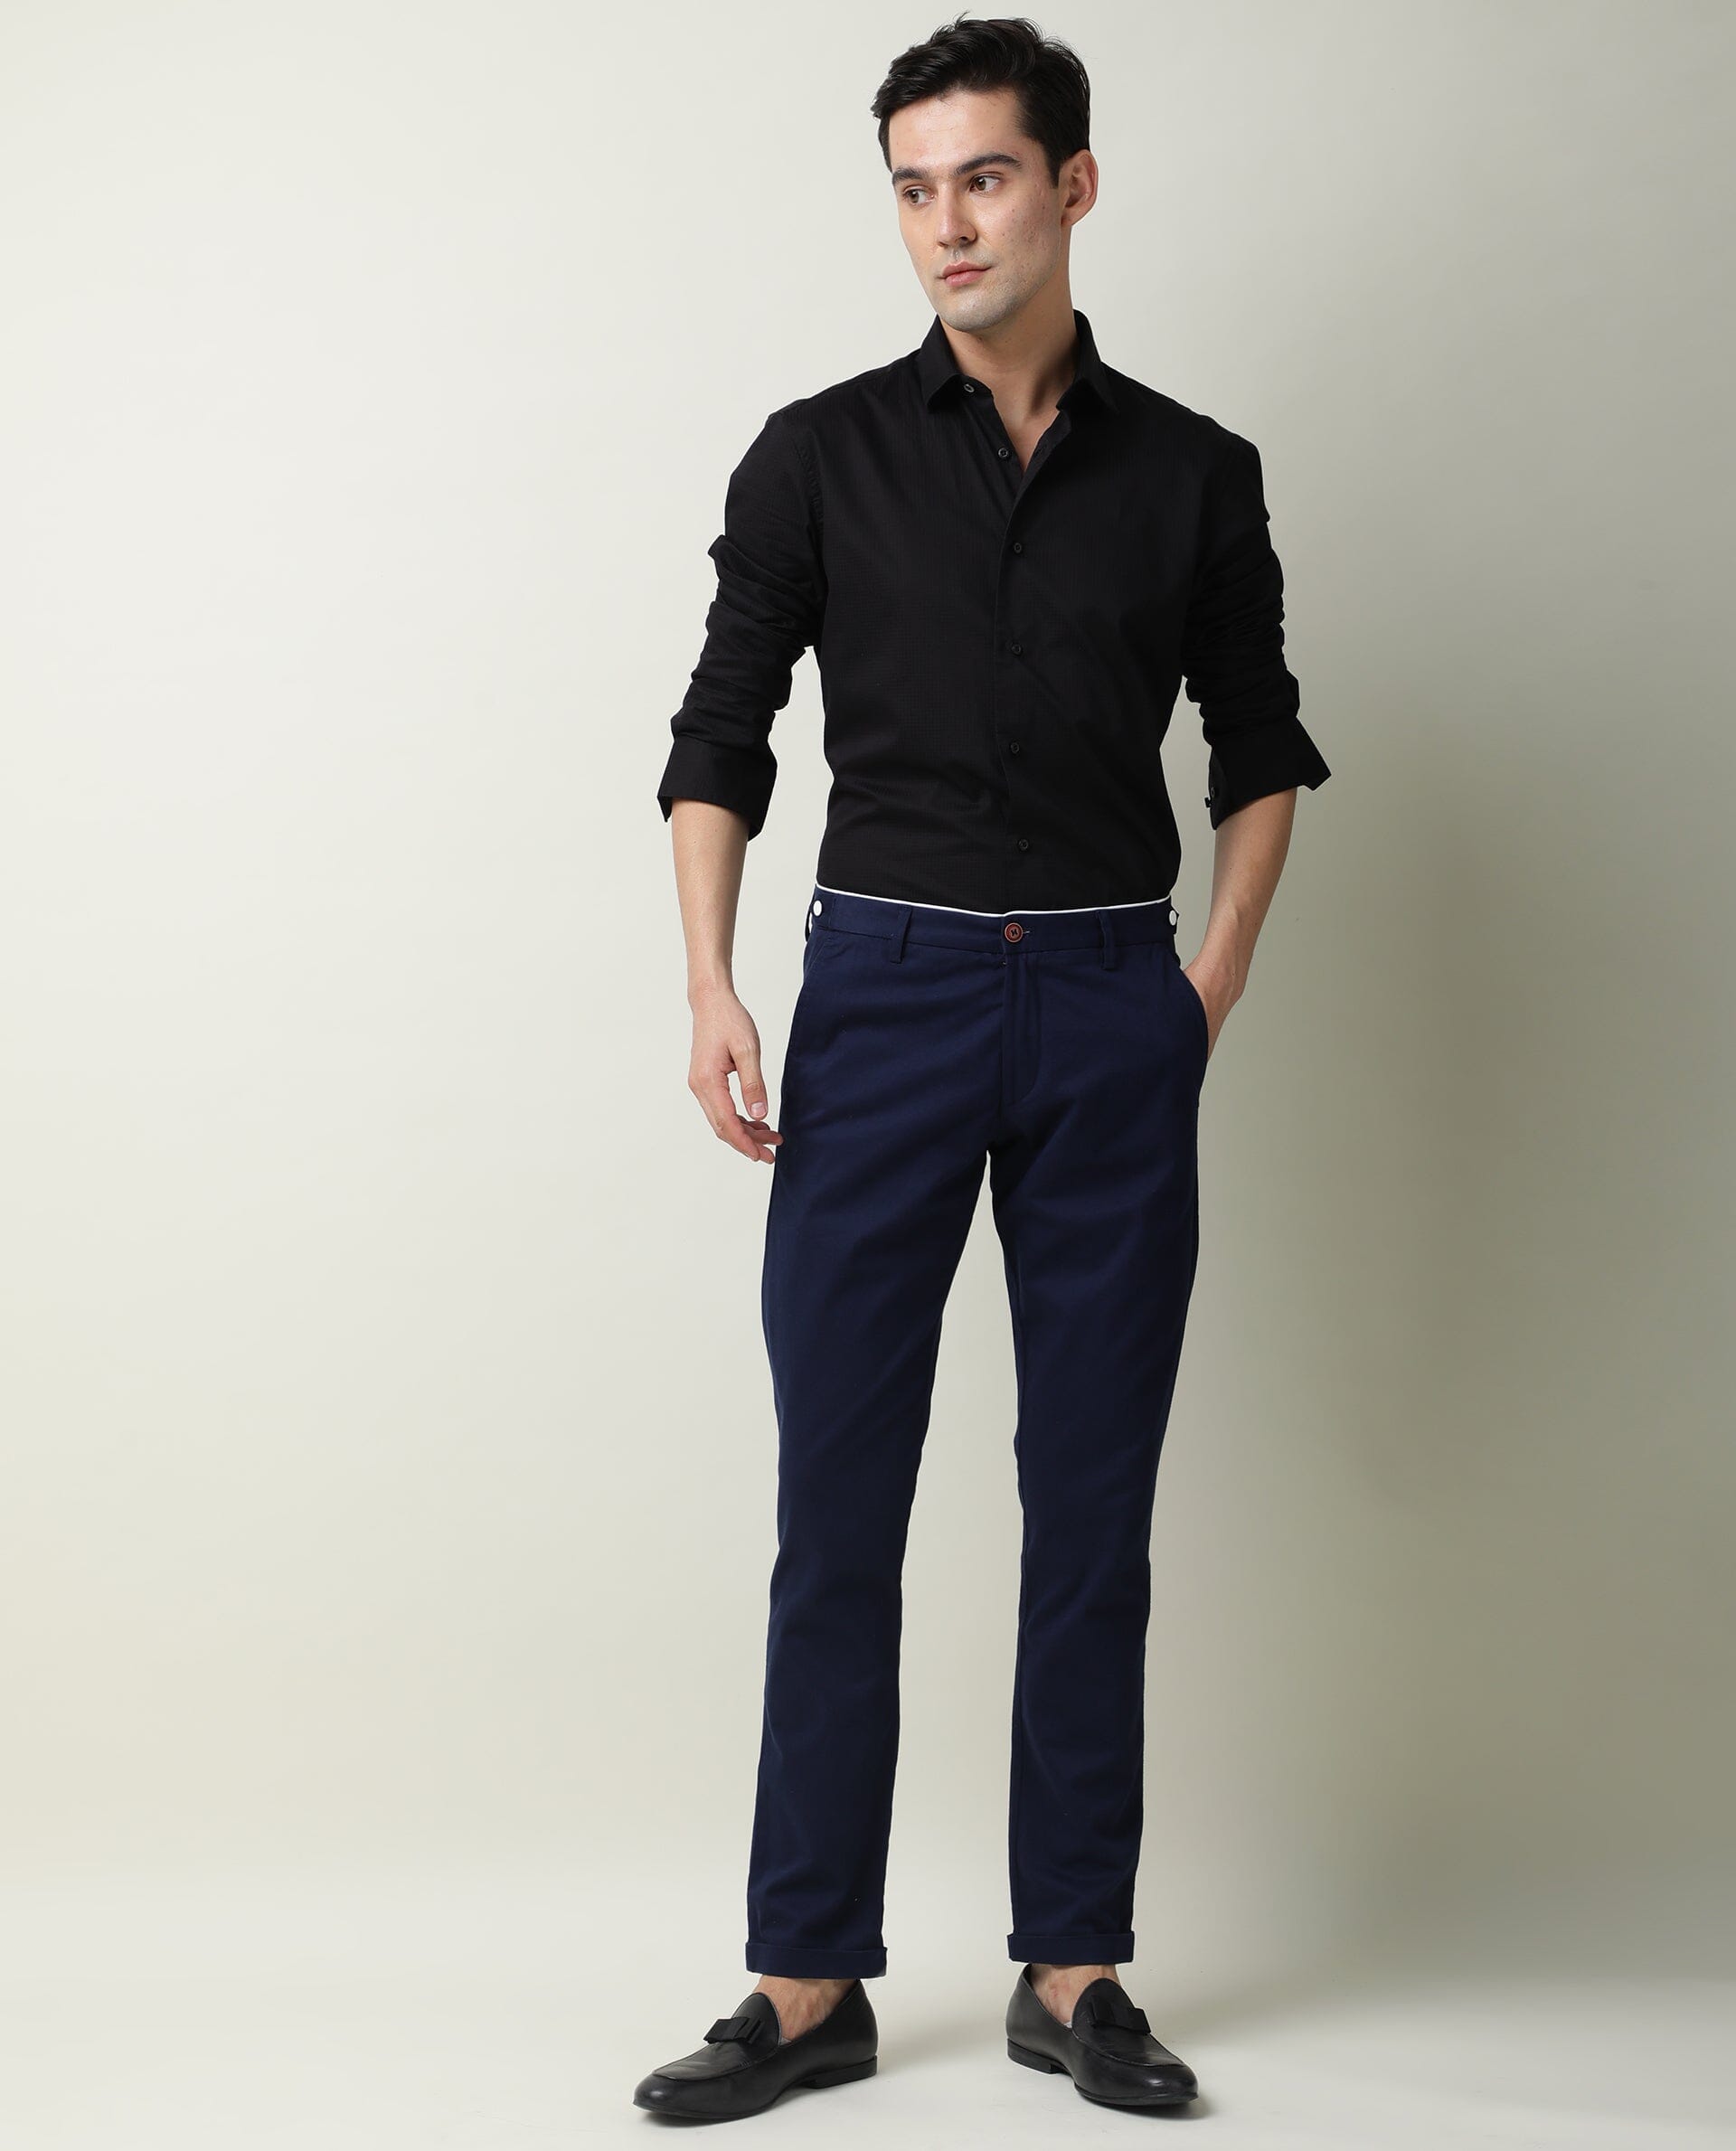 Formal Pants  Navy Blue Colour buy online in India at cheap price   Scholar Shoppe